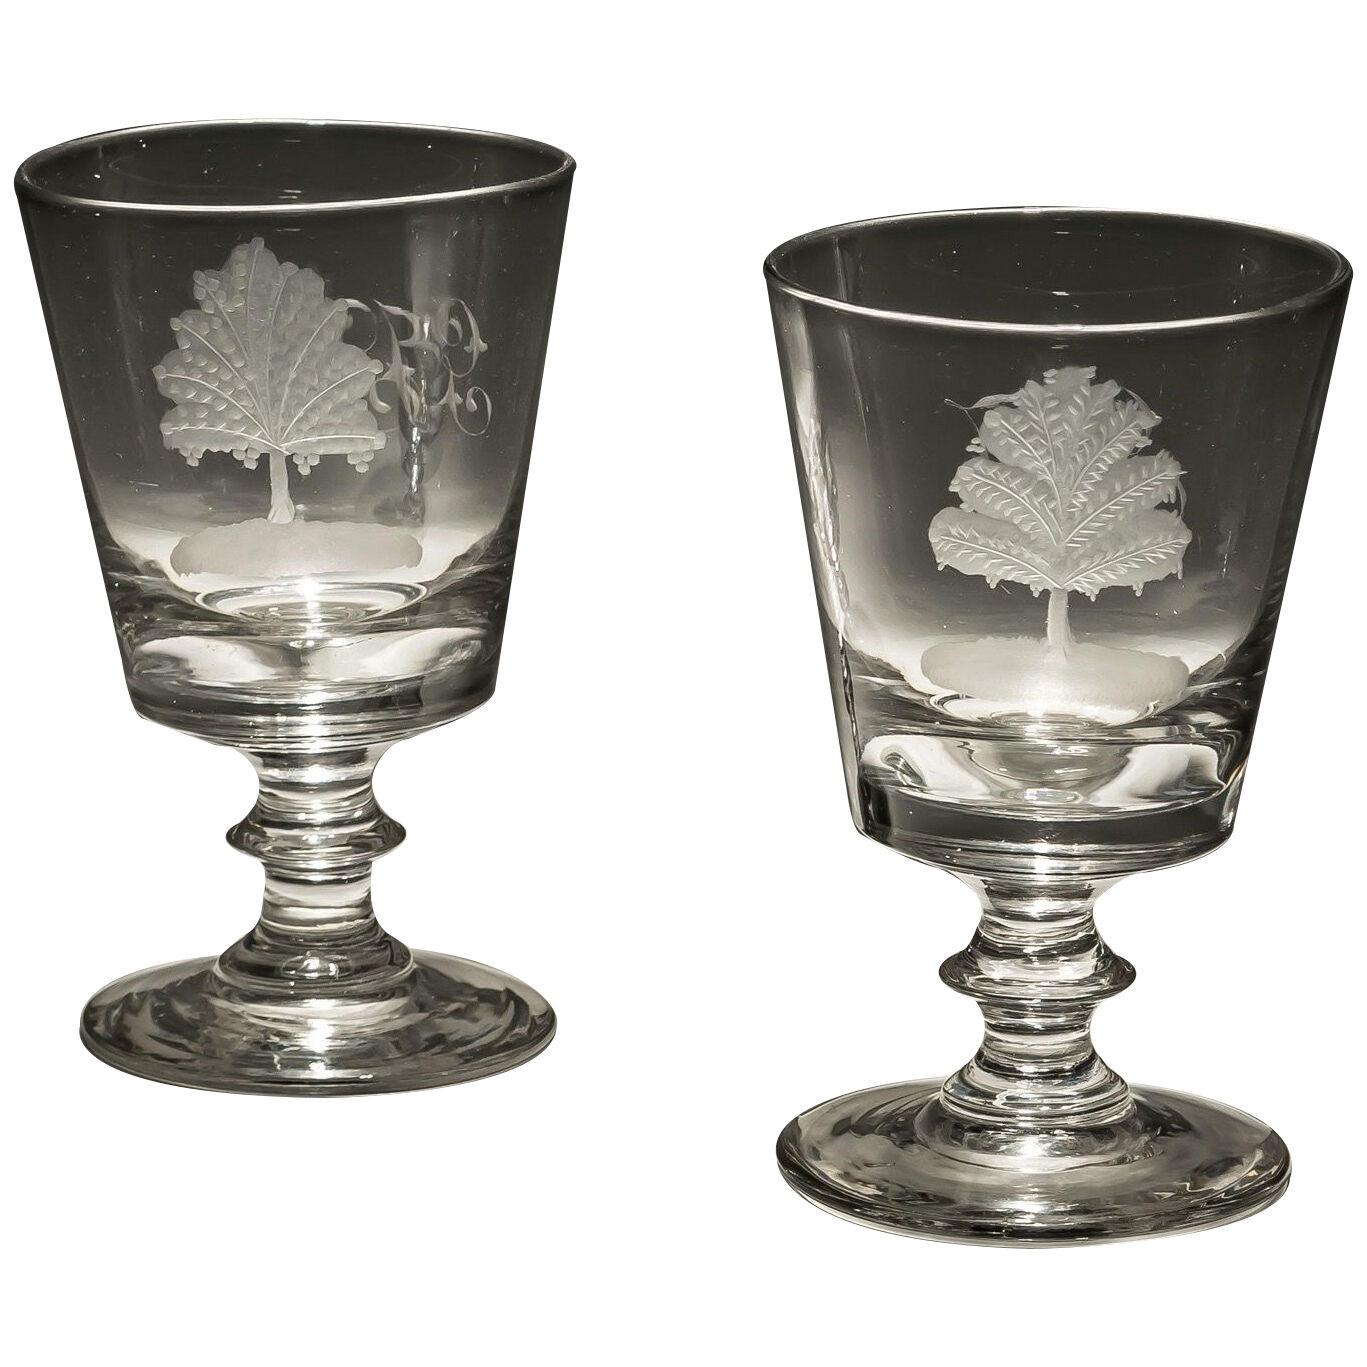 A FINE PAIR OF ENGRAVED BUCKET BOWL GOBLETS